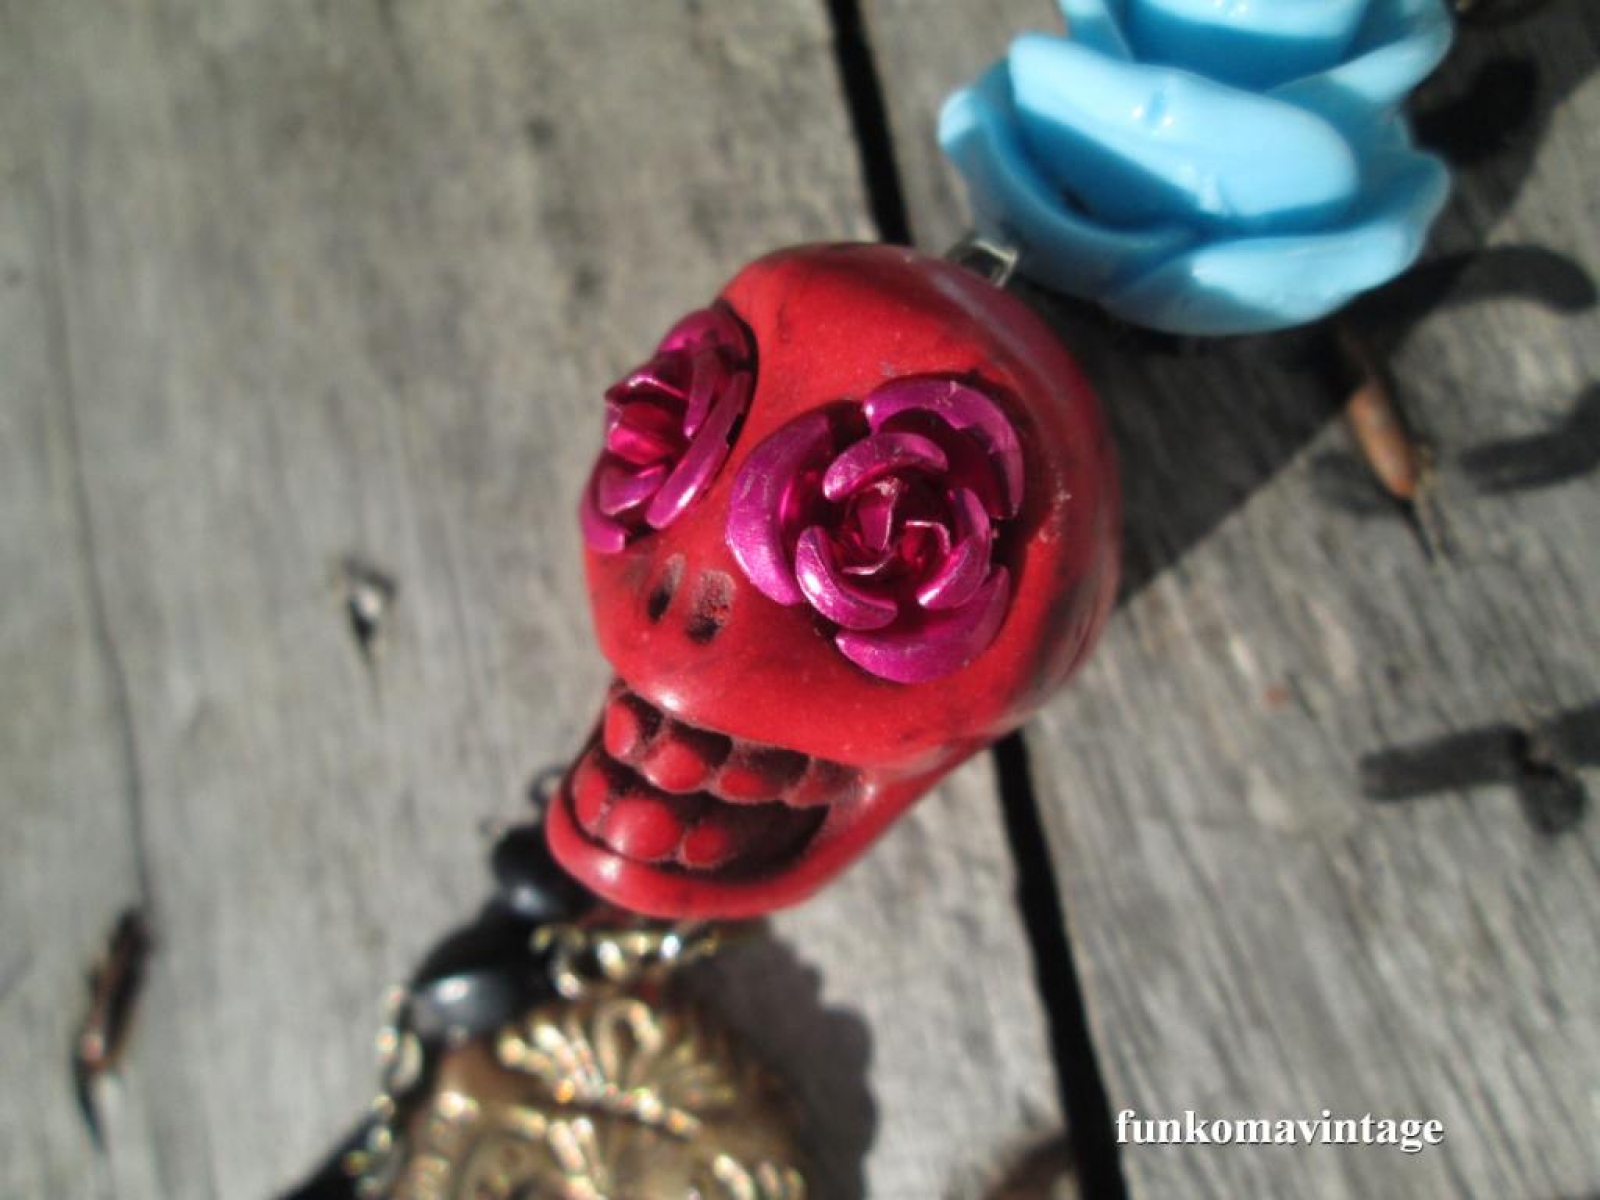 MATURE Goth, Sugar Skull Charms, With Red Tirgers Eye and Yellow